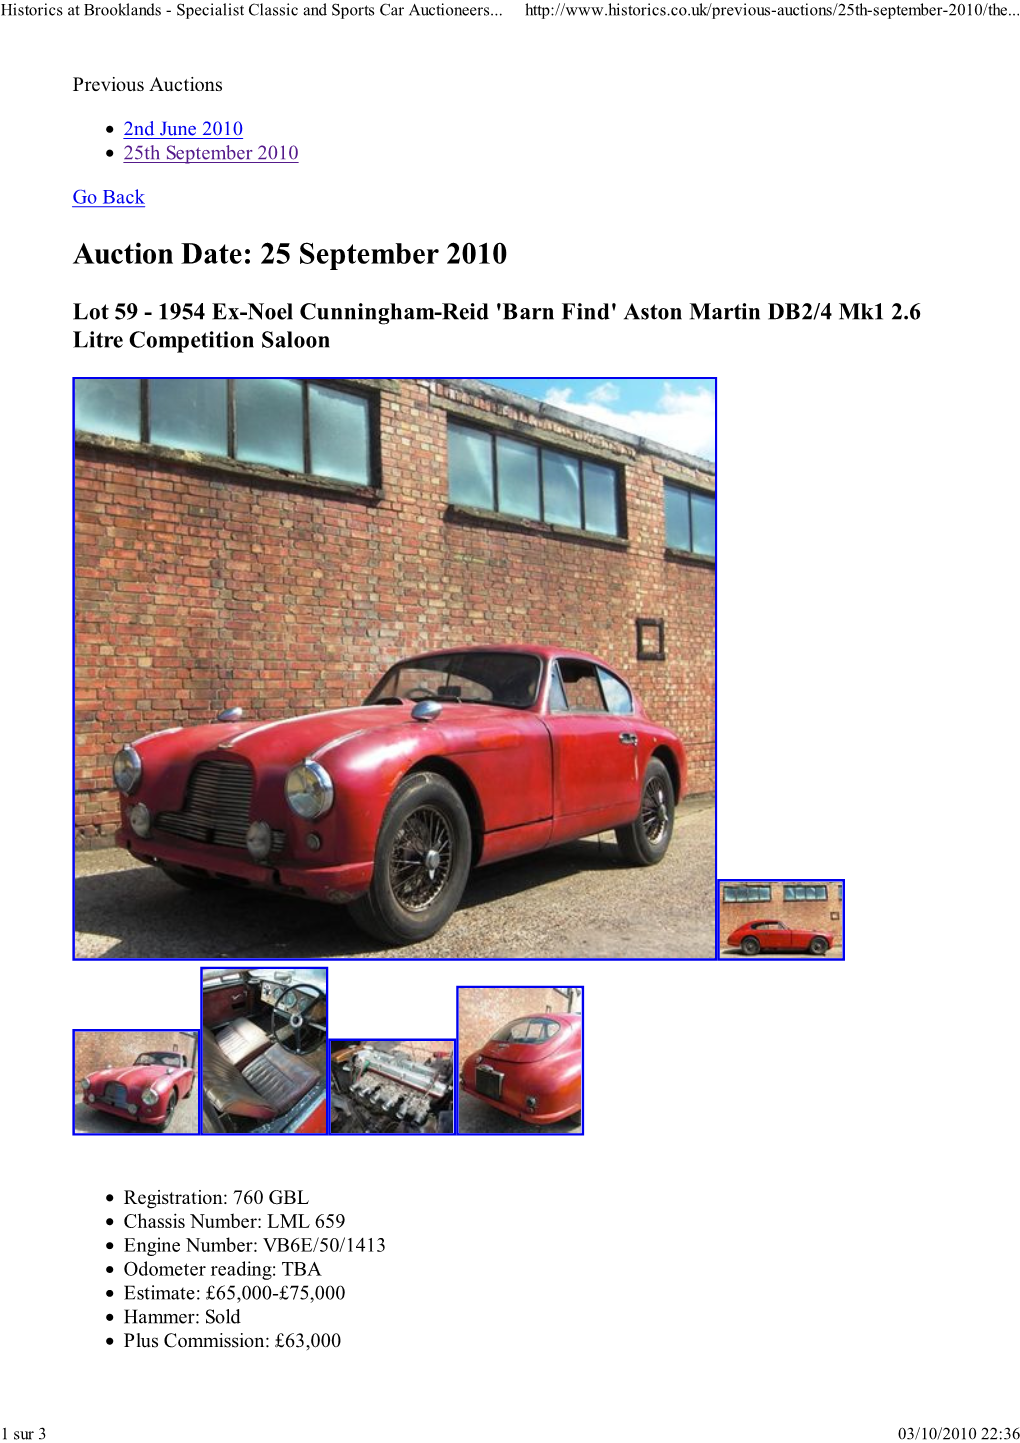 Historics at Brooklands - Specialist Classic and Sports Car Auctioneers